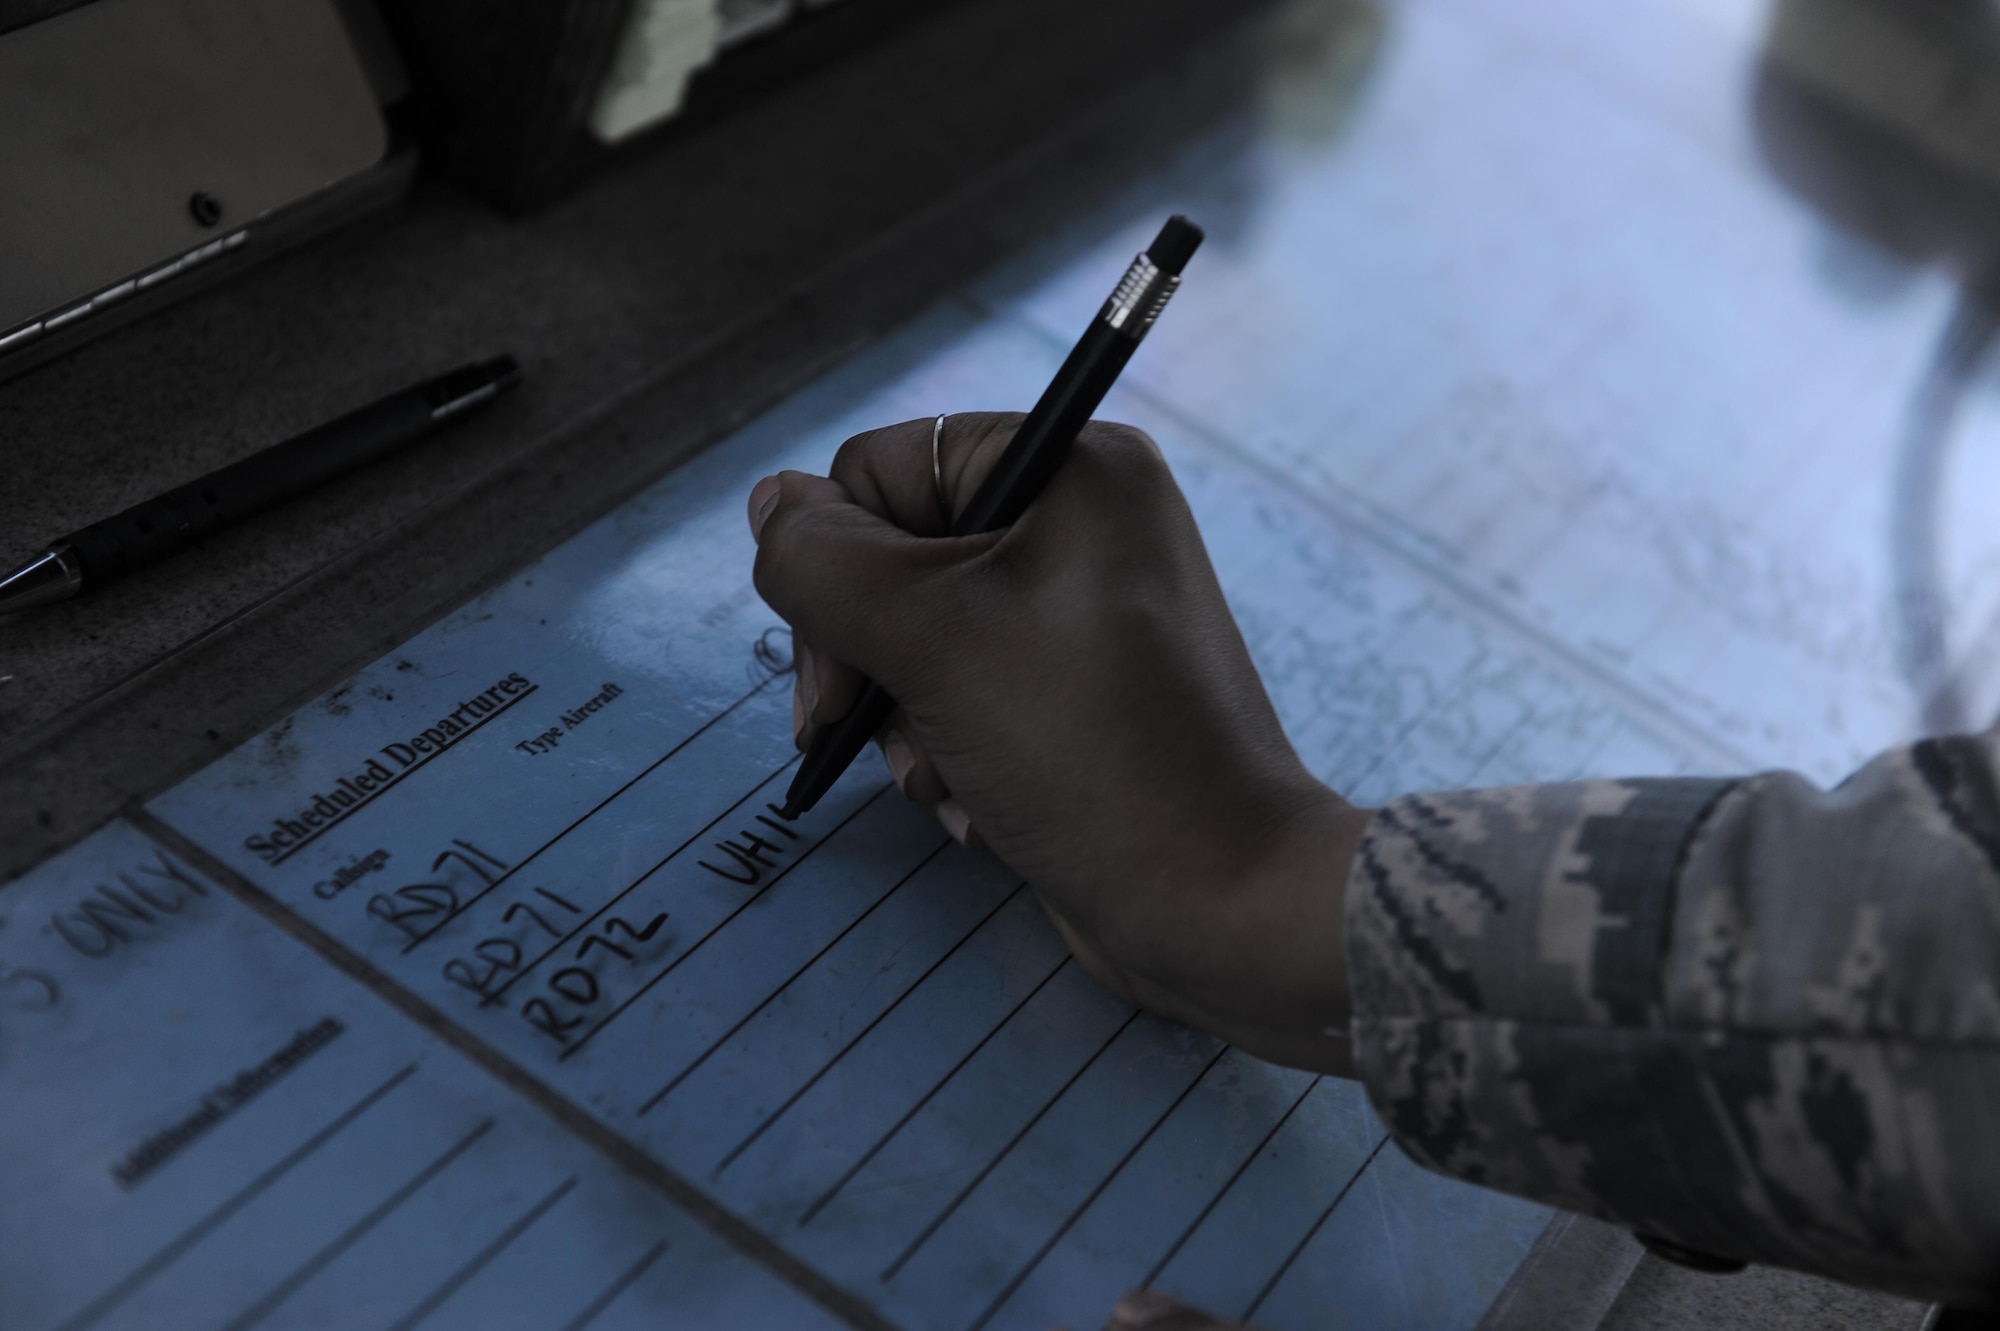 Airman 1st Class Victoria Swain, an air traffic control journeyman with the 1st Special Operations Support Squadron, writes down scheduled departures of aircraft at Hurlburt Field, Fla., May 3, 2017. Air traffic controllers track and supervise aircraft movement on the flight line and in the air. (U.S. Air Force photo by Airman 1st Class Isaac O. Guest IV)